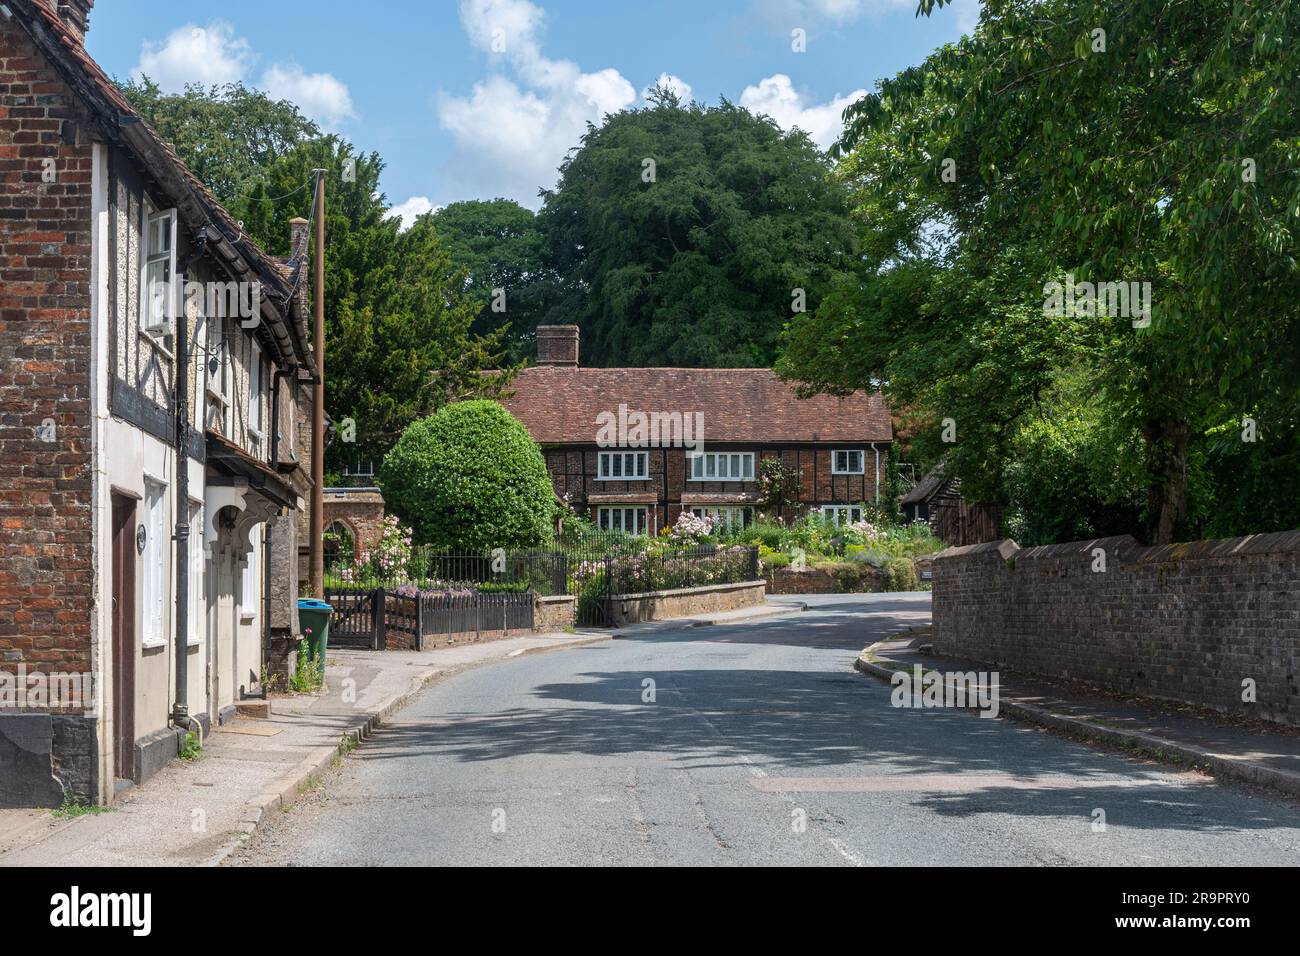 Ivinghoe village, view of the high street in summer, Buckinghamshire, England, UK Stock Photo